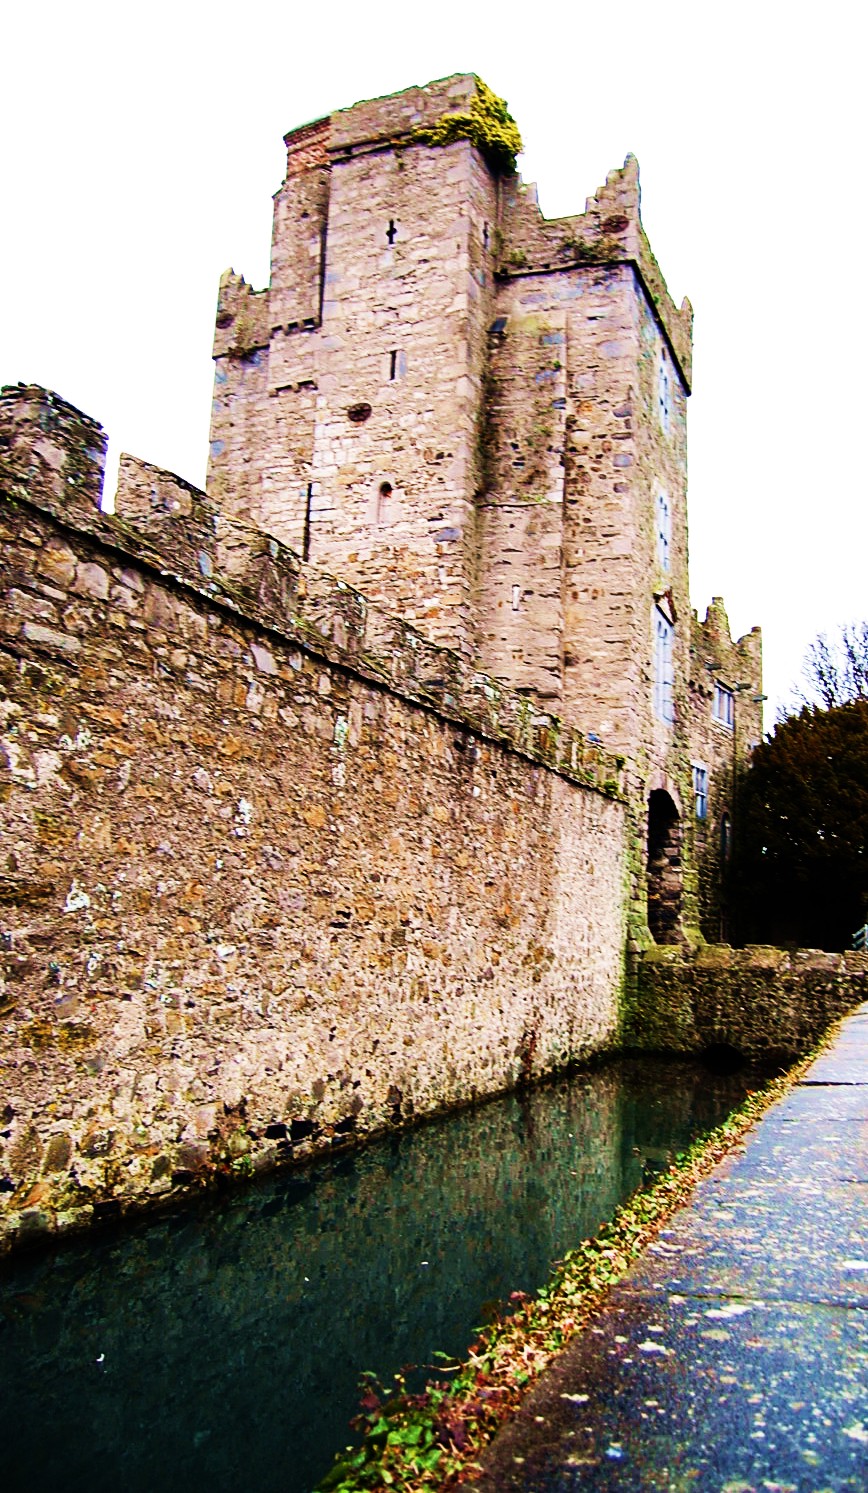 there is a castle and the water runs in front of it